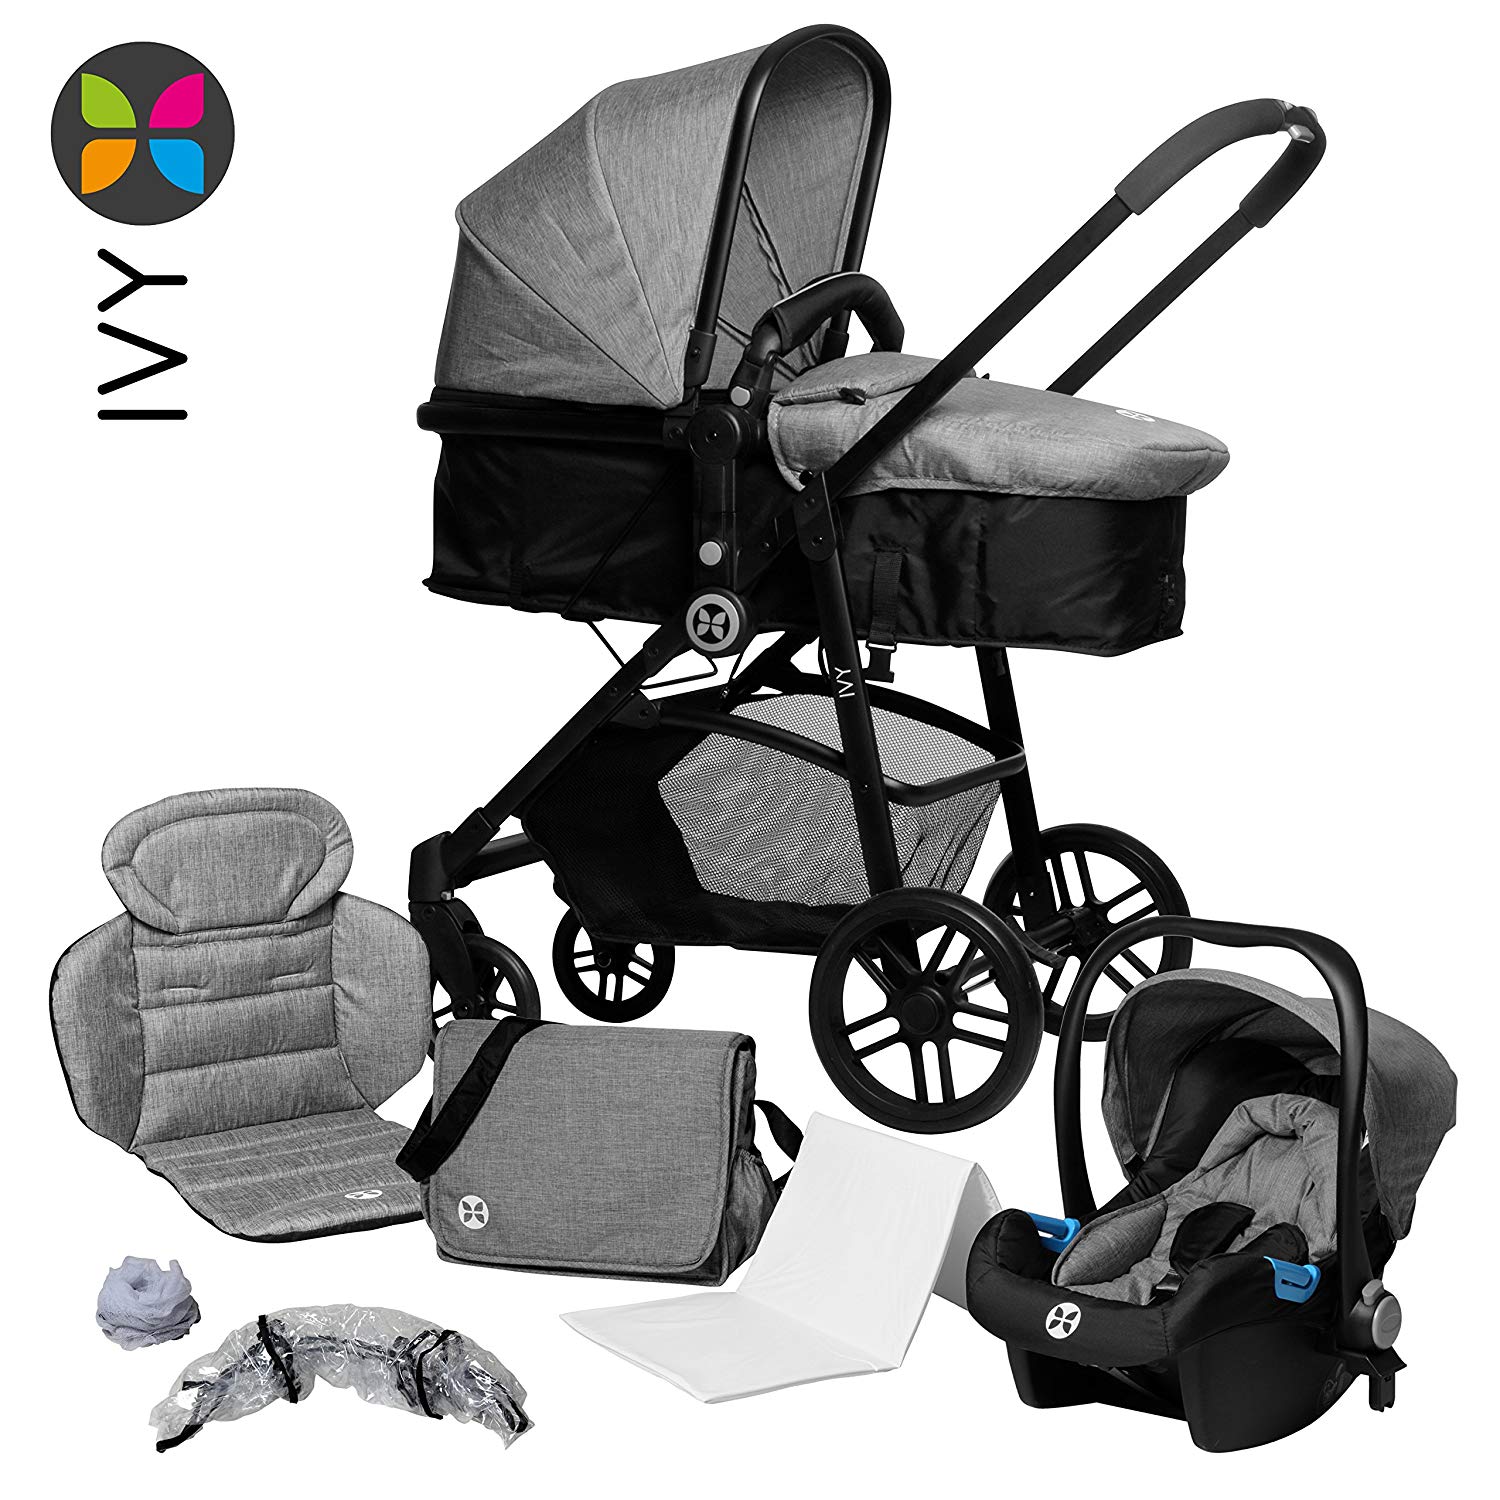 Combination Pram 3 in 1, Complete Set incl. Baby Car Seat (Car) and Tub, Baby Flower Ivy